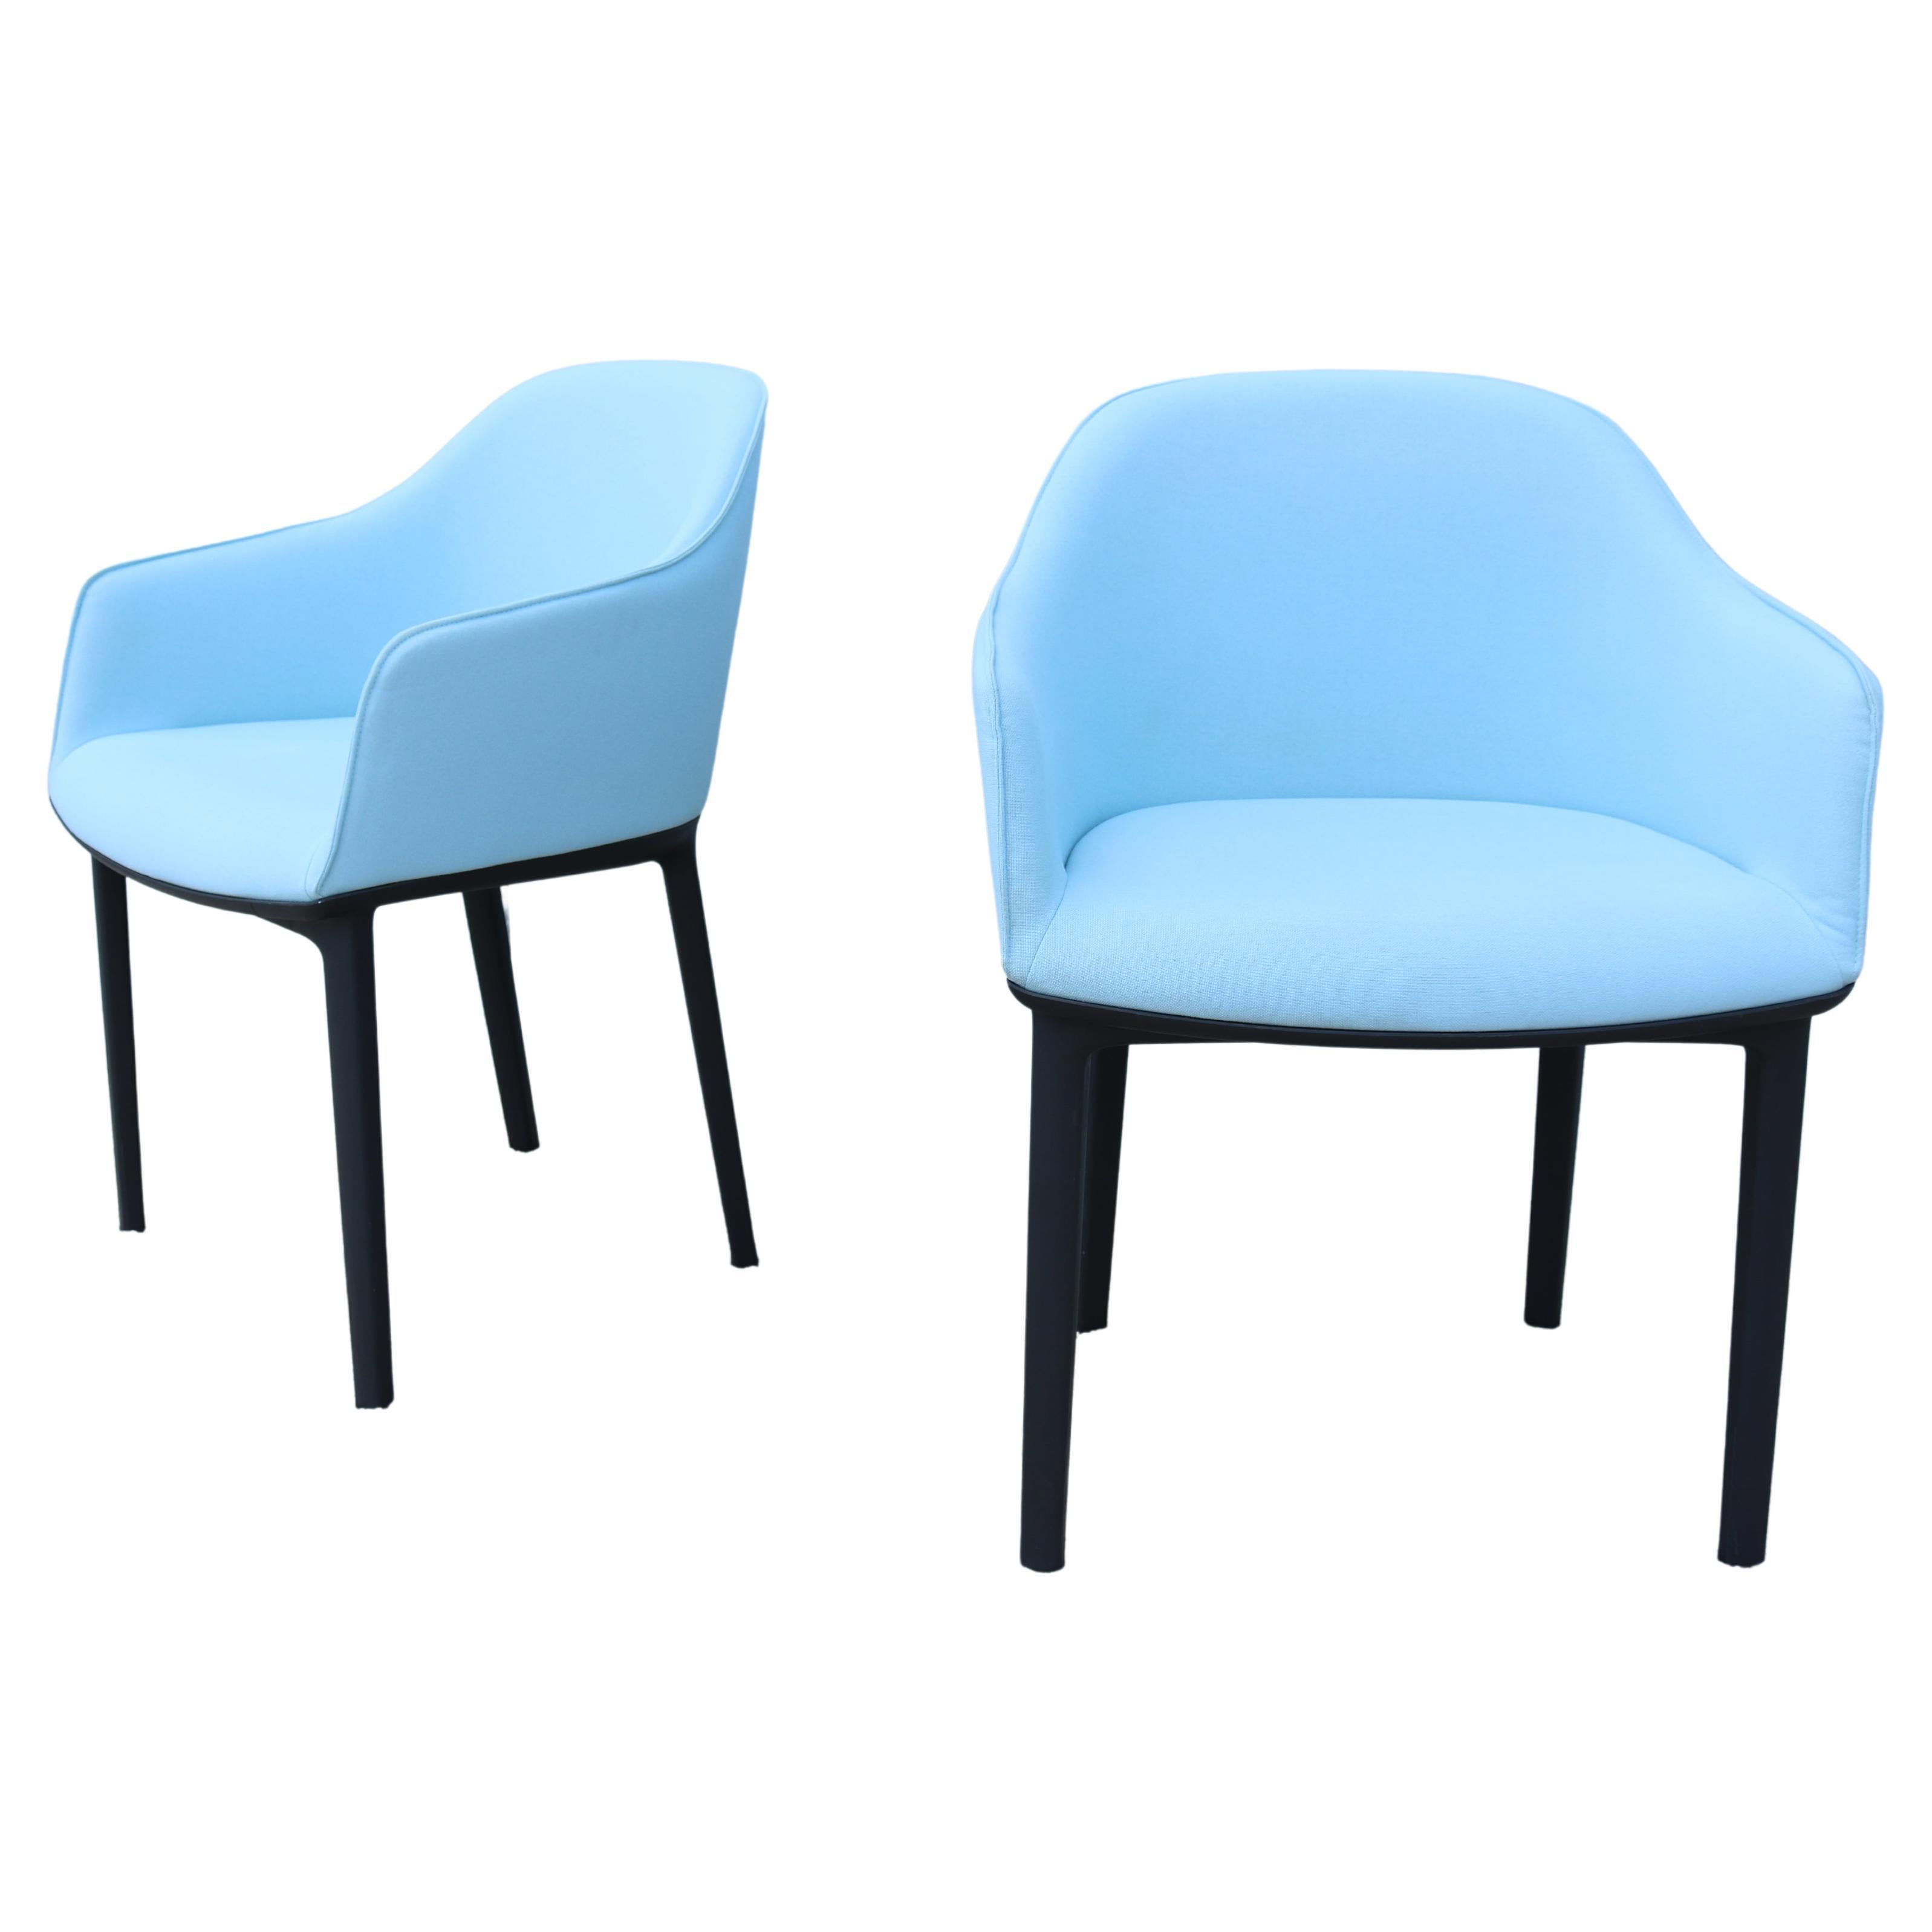 Modern Ronan and Erwan Bouroullec for Vitra Ice Blue Softshell Chairs, a Pair For Sale